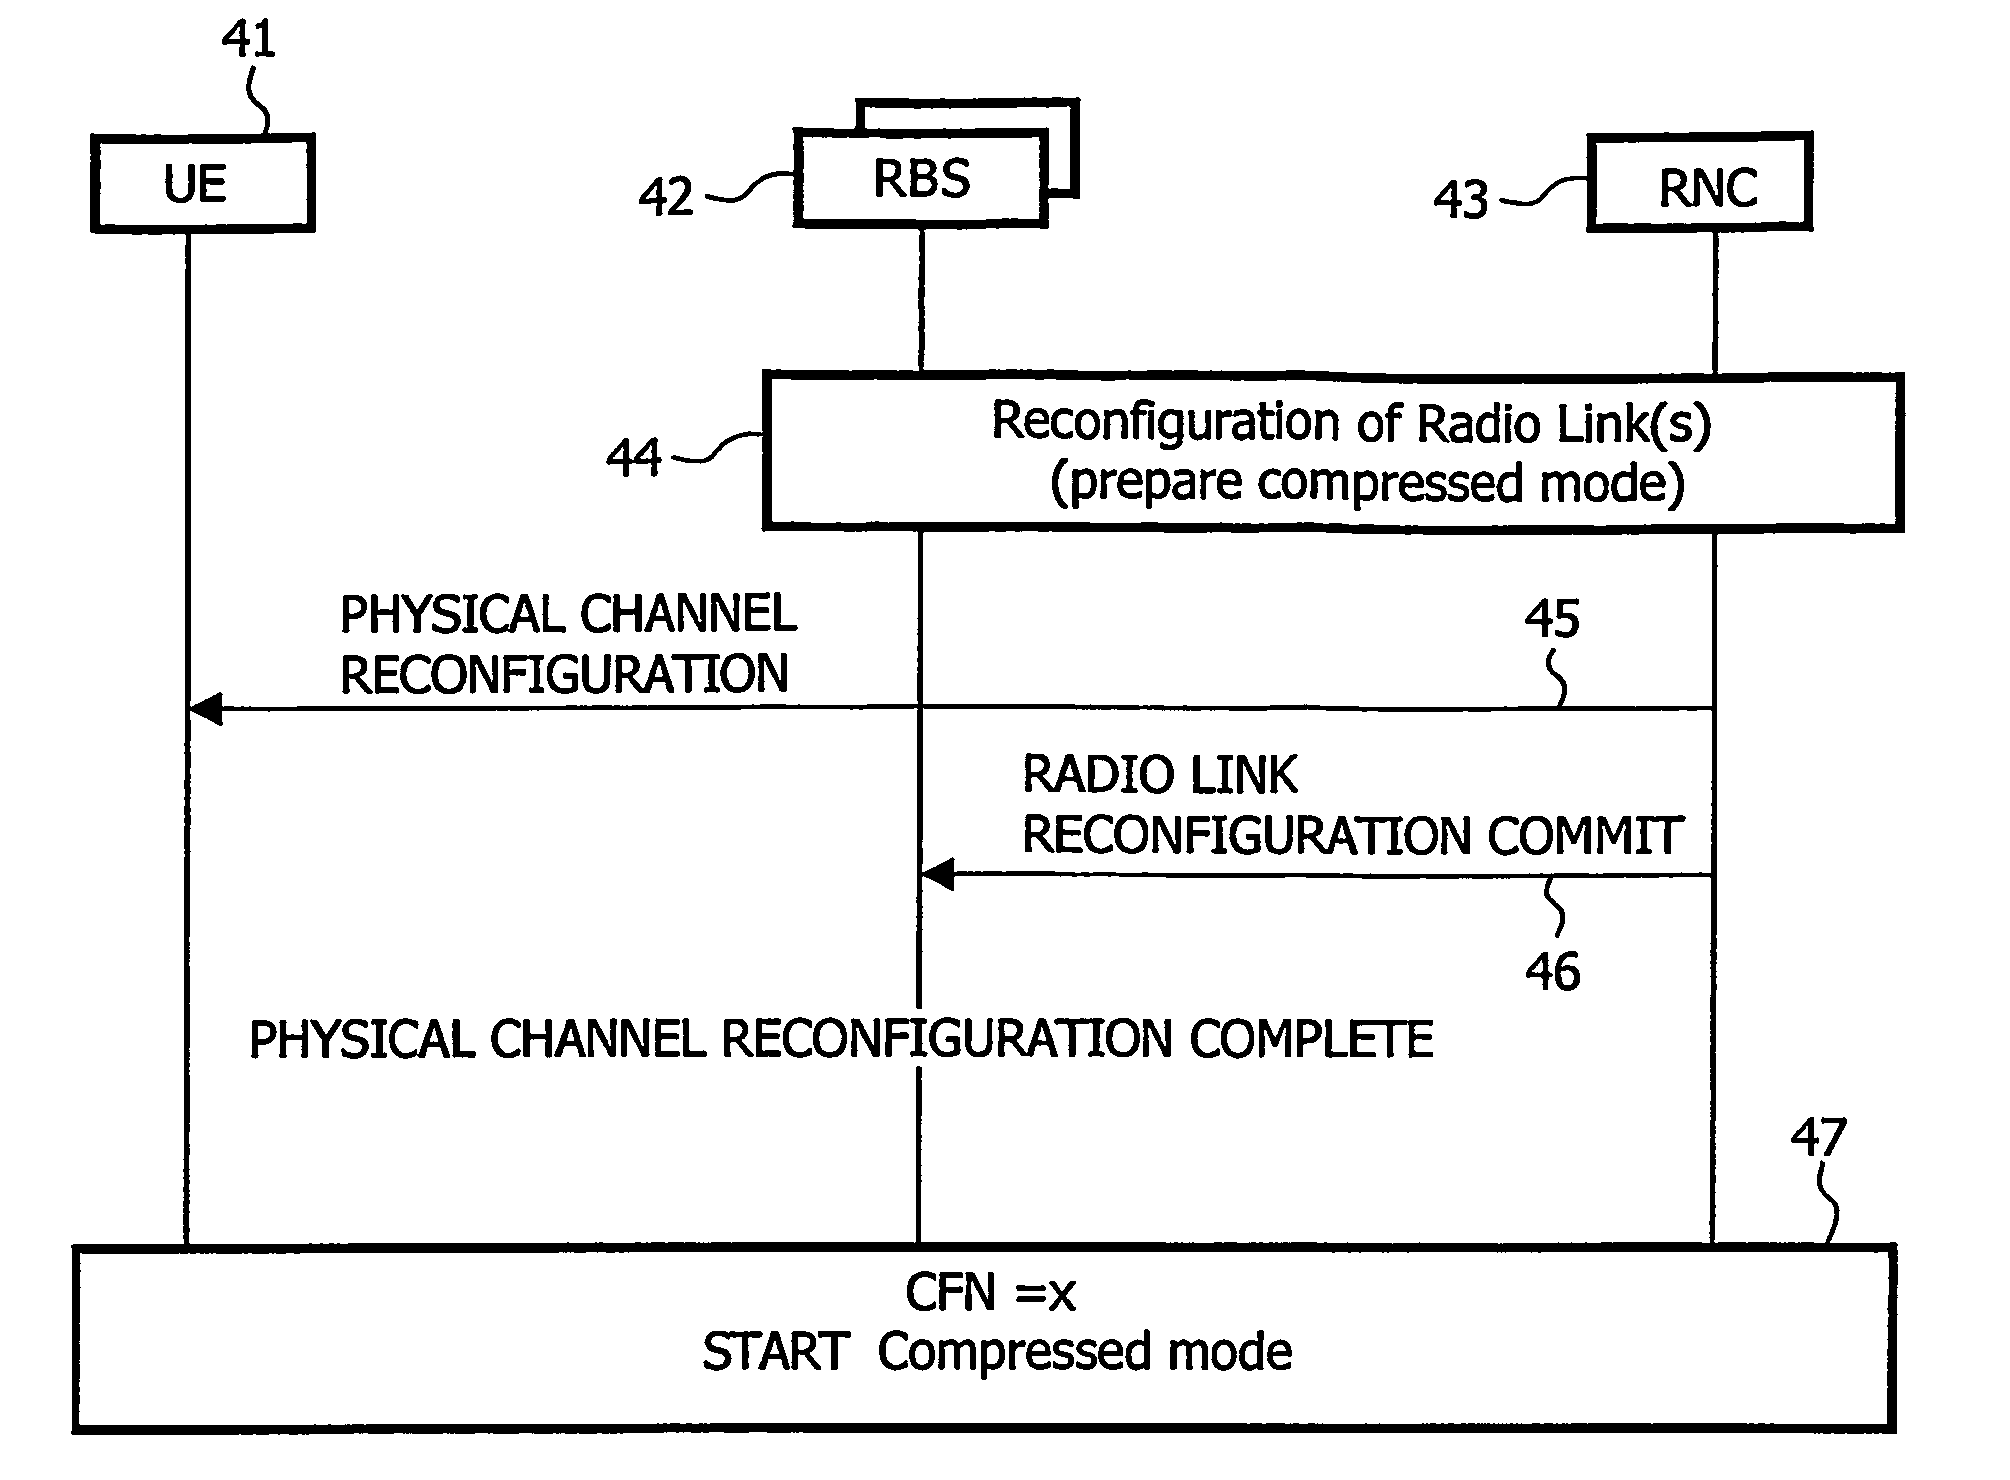 Controlling reconfiguration in a cellular communication system